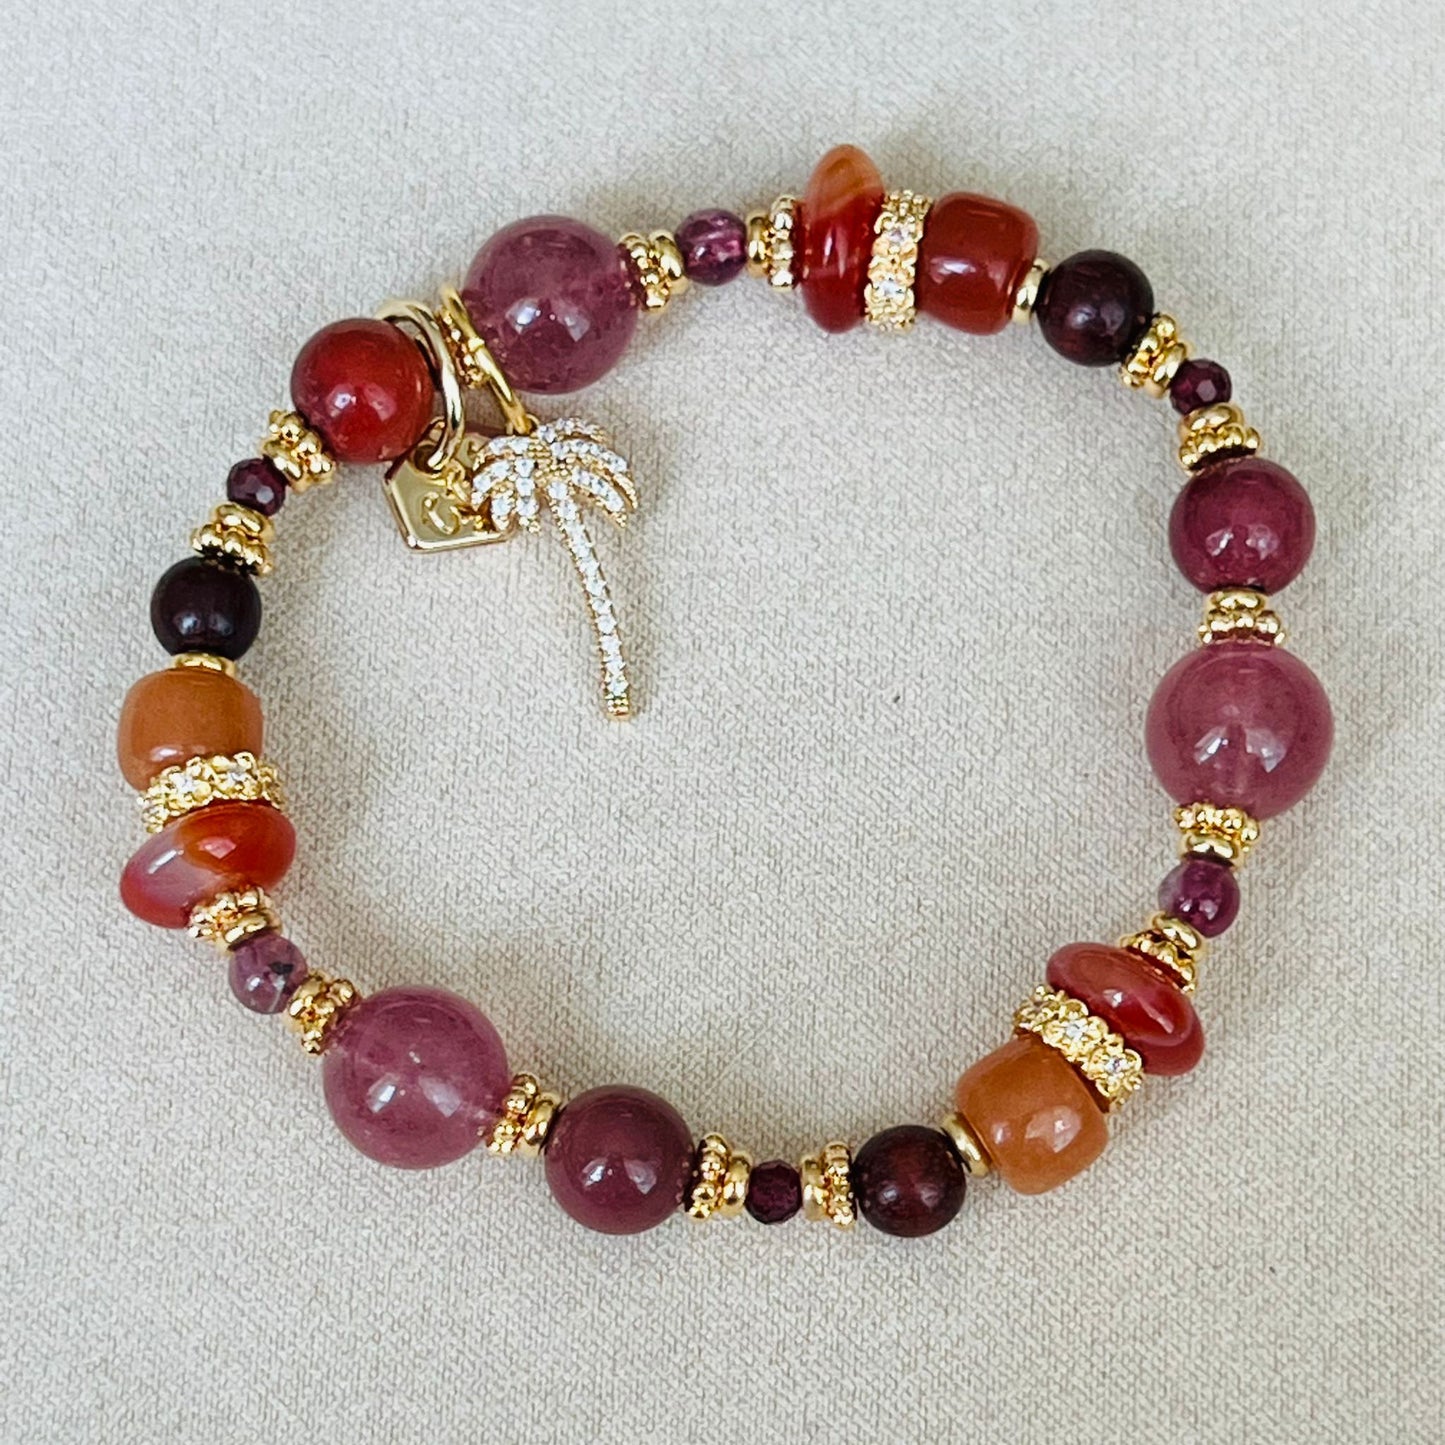 Looking For Stability, Creativity & Confidence Bracelet